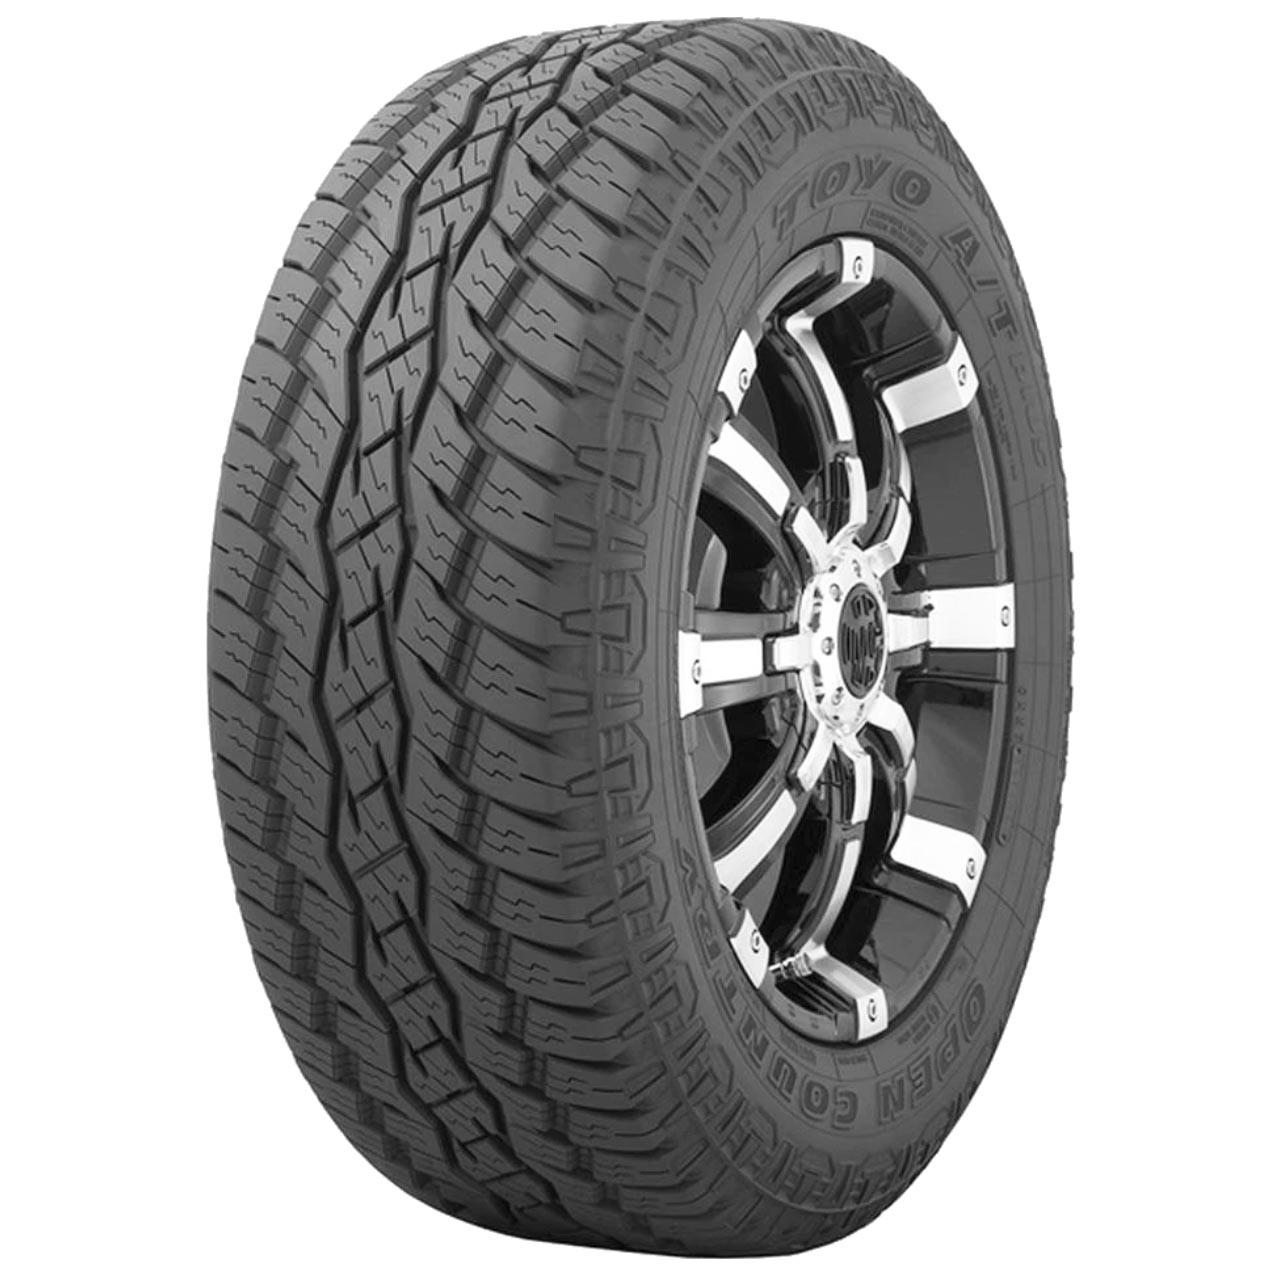 Toyo Open Country AT Plus 30X9.50R15C 104S